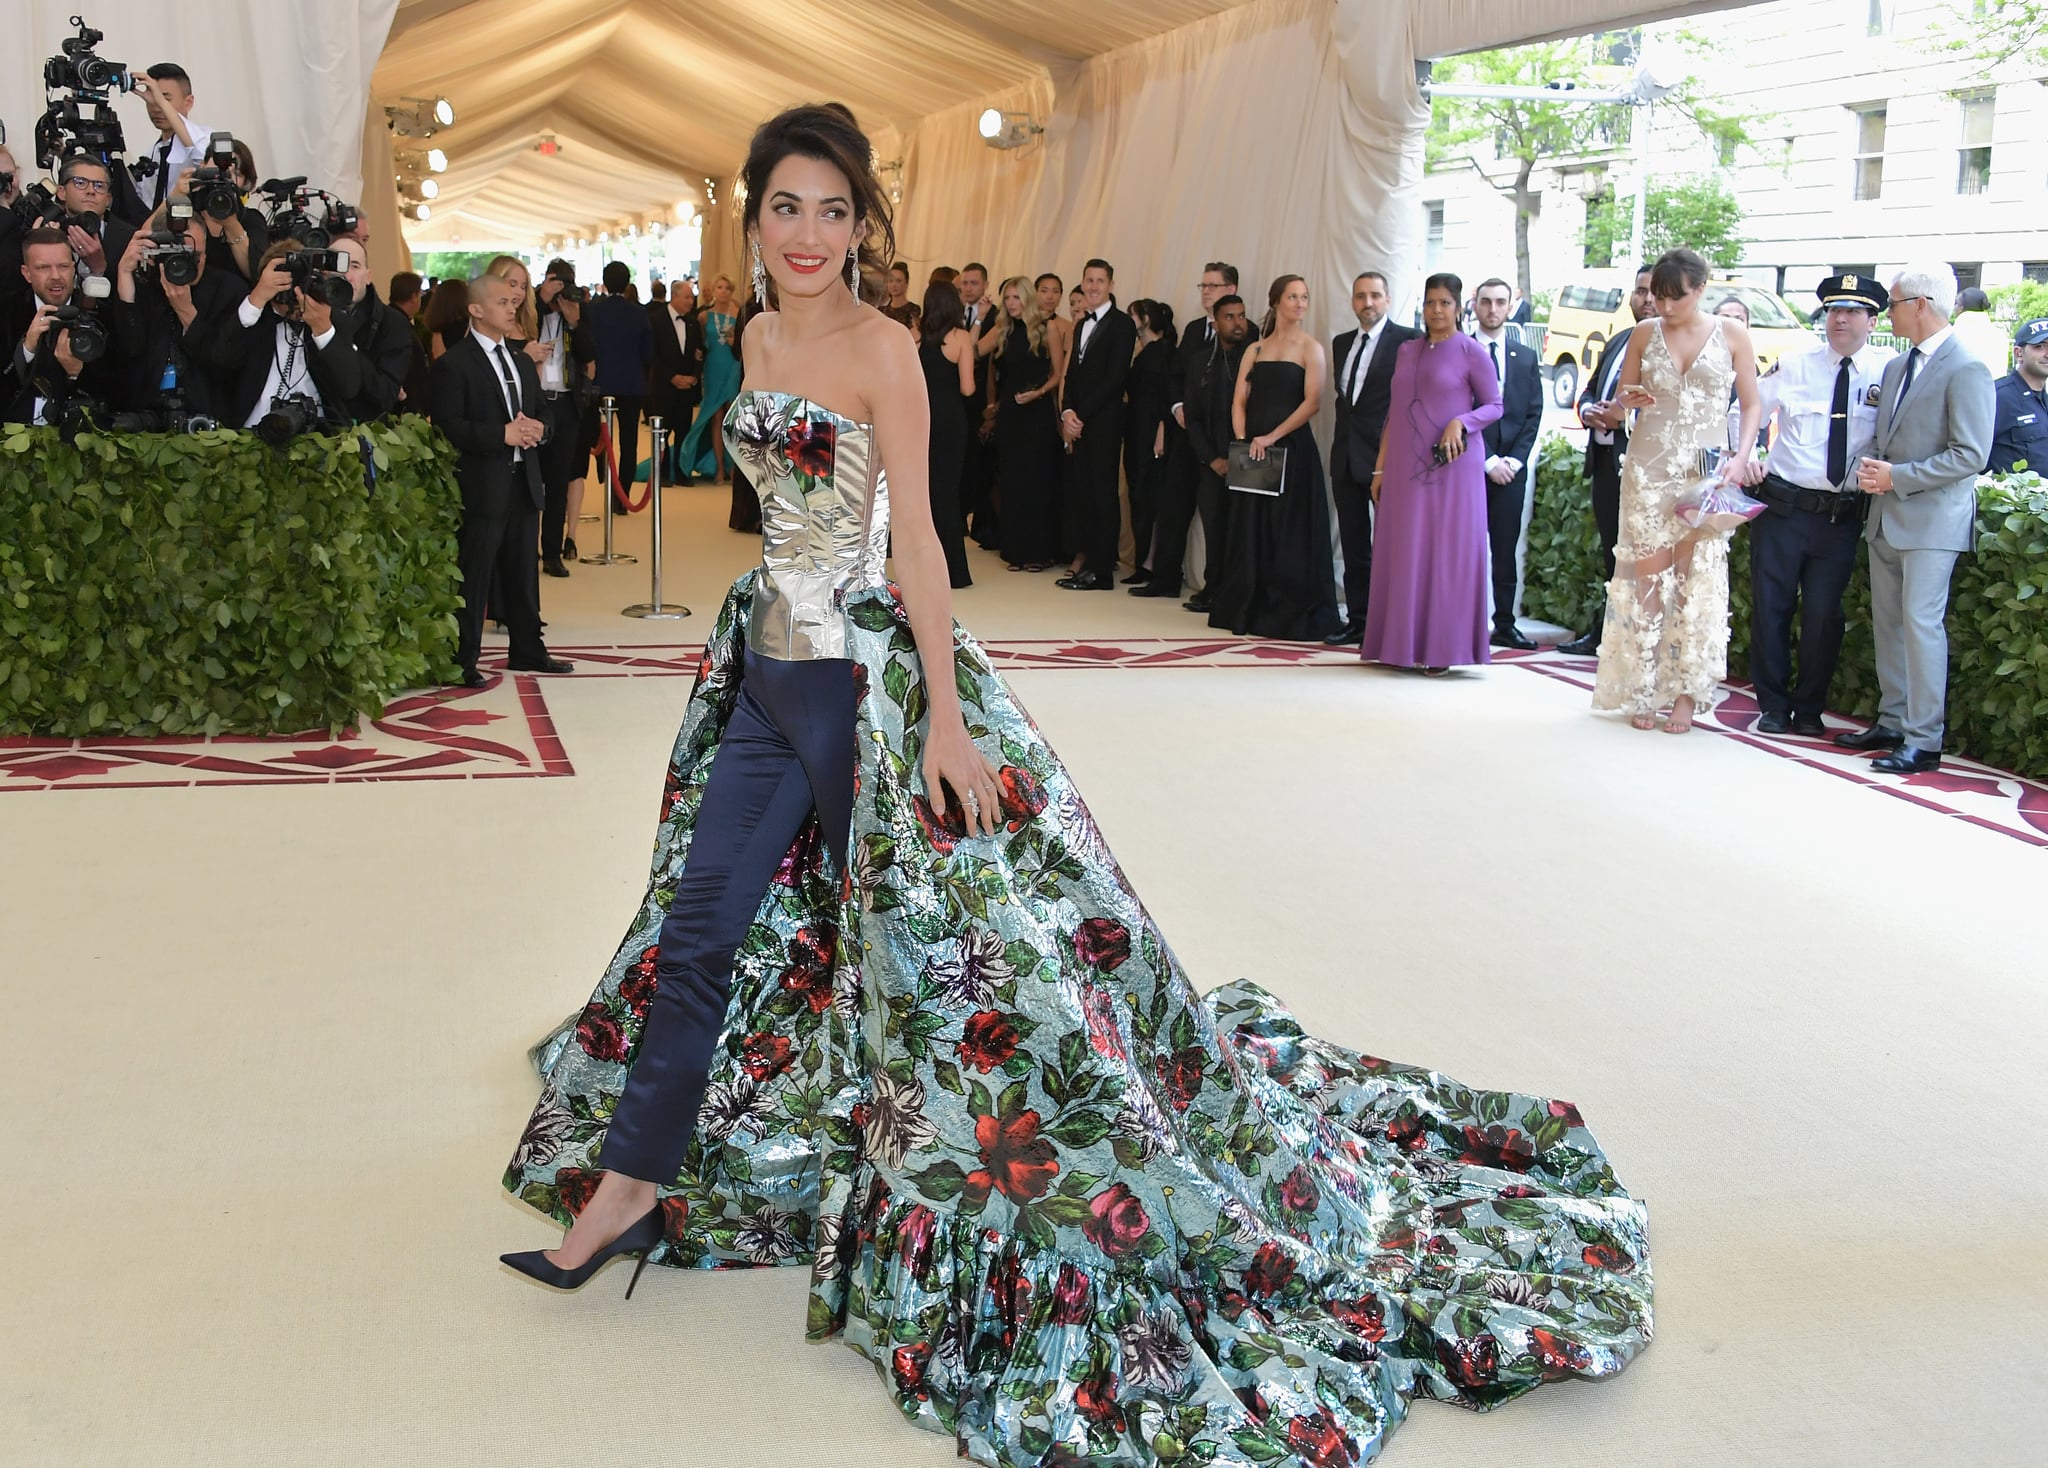 NEW YORK, NY - MAY 07:  Amal Clooney attends the Heavenly Bodies: Fashion & The Catholic Imagination Costume Institute Gala at The Metropolitan Museum of Art on May 7, 2018 in New York City.  (Photo by Neilson Barnard/Getty Images)